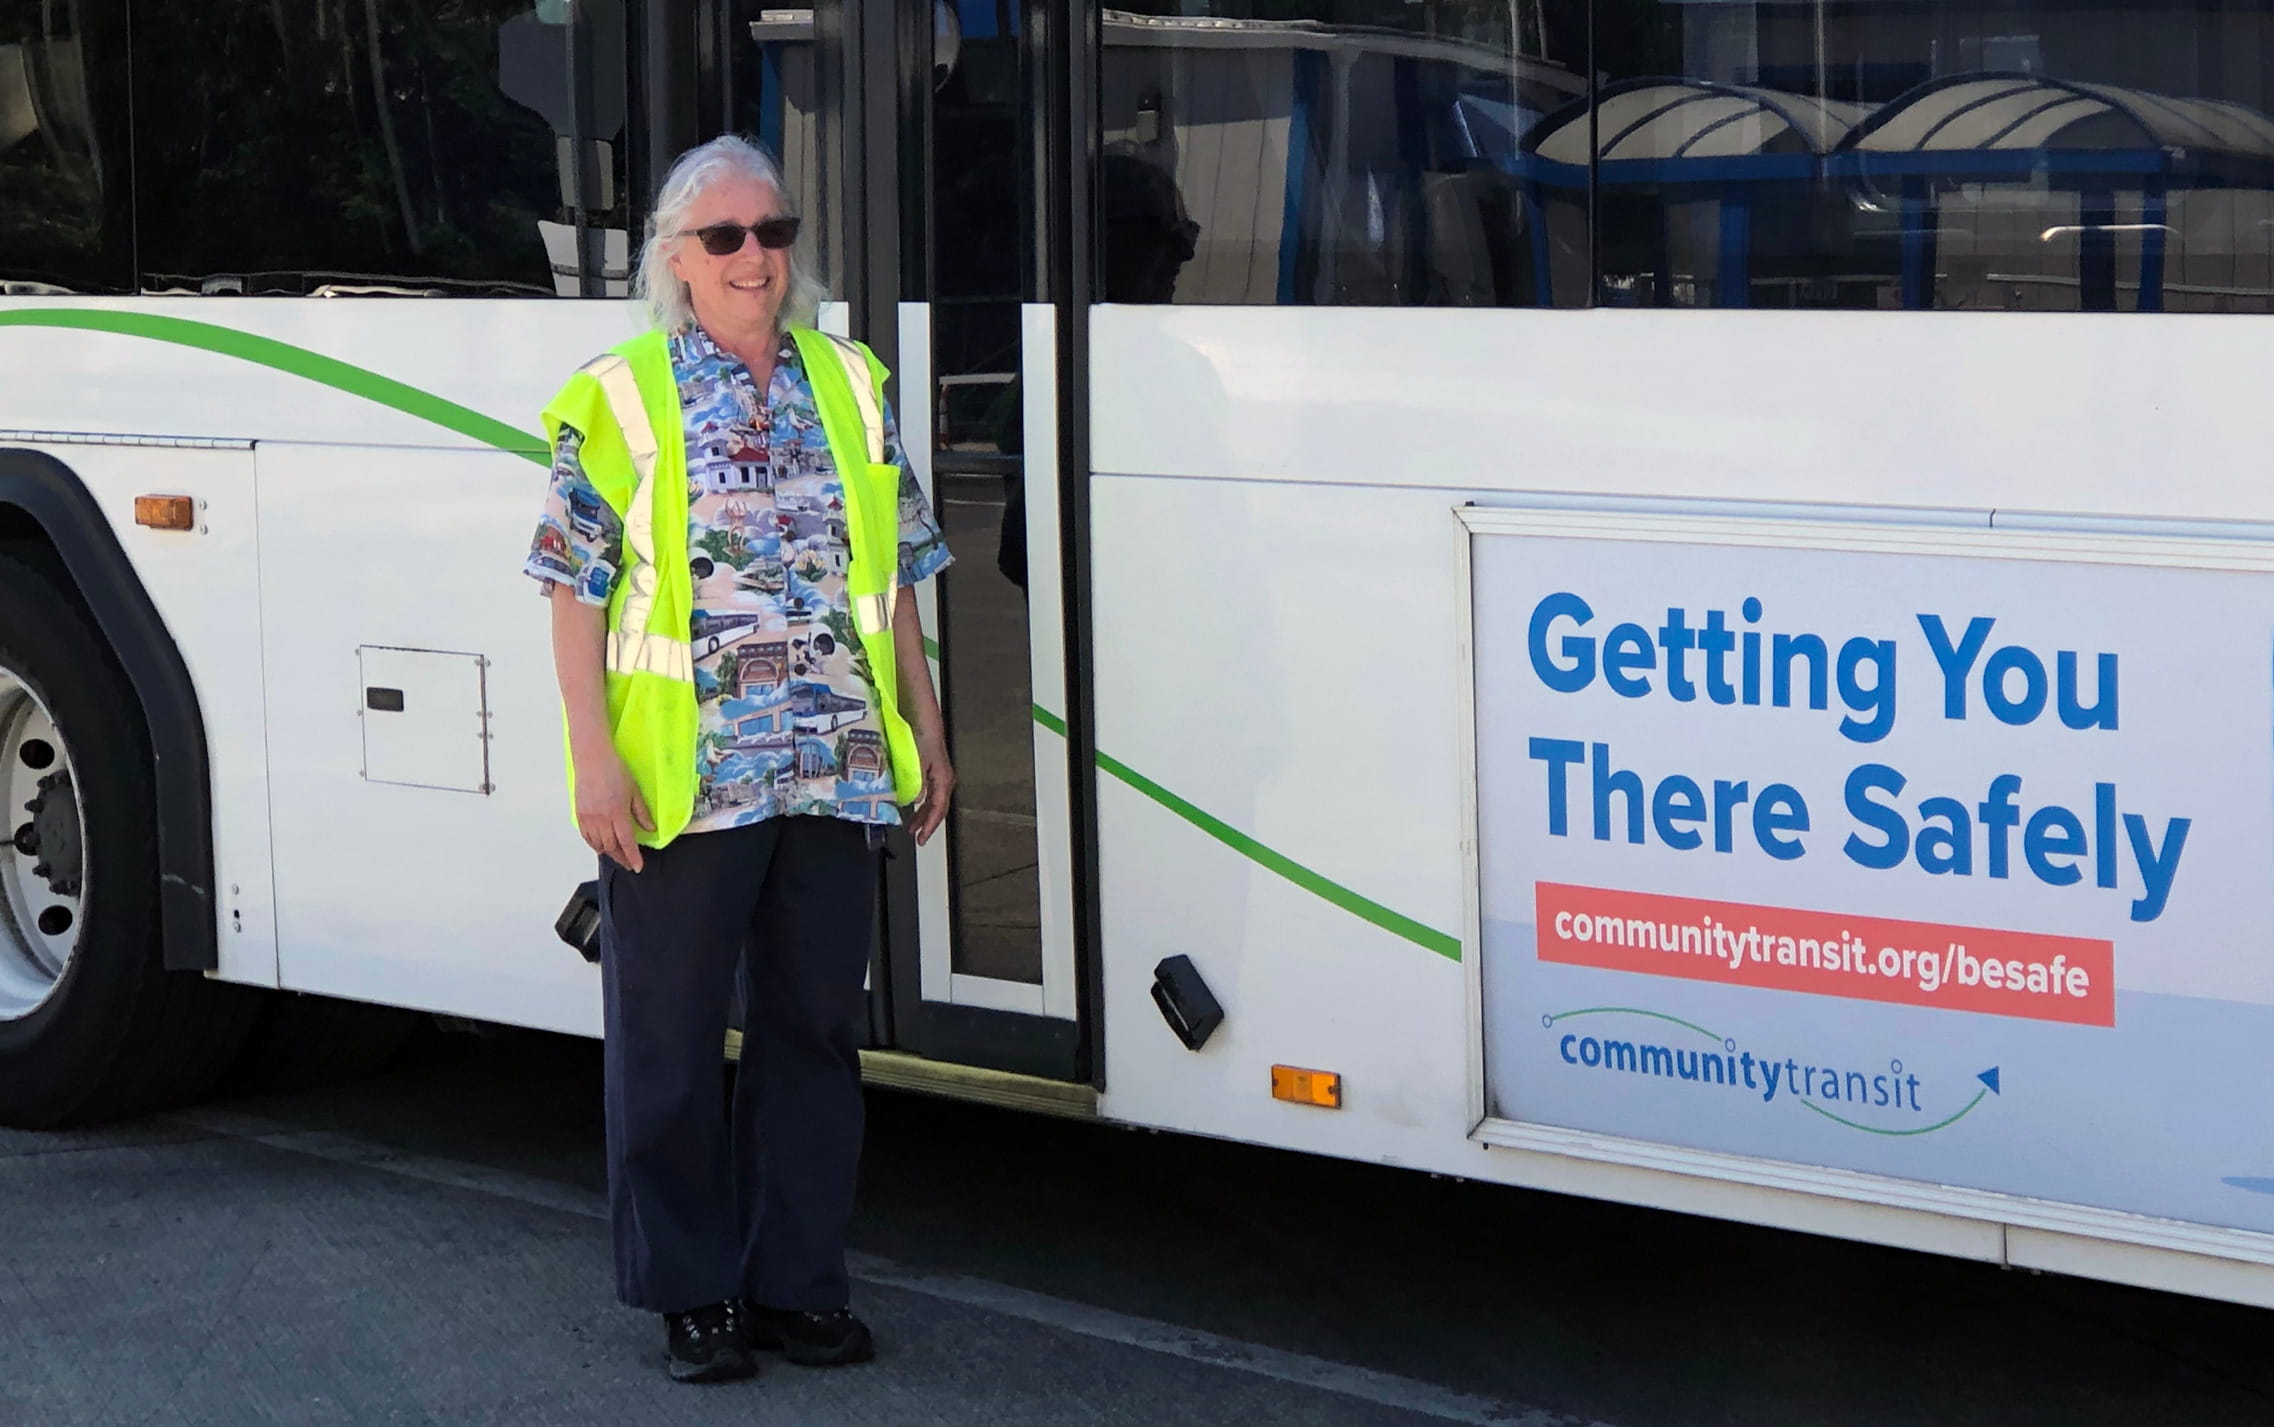 A female bus driver stands next to a Community Transit bus. She has long silver hair and is wearing a safety best.